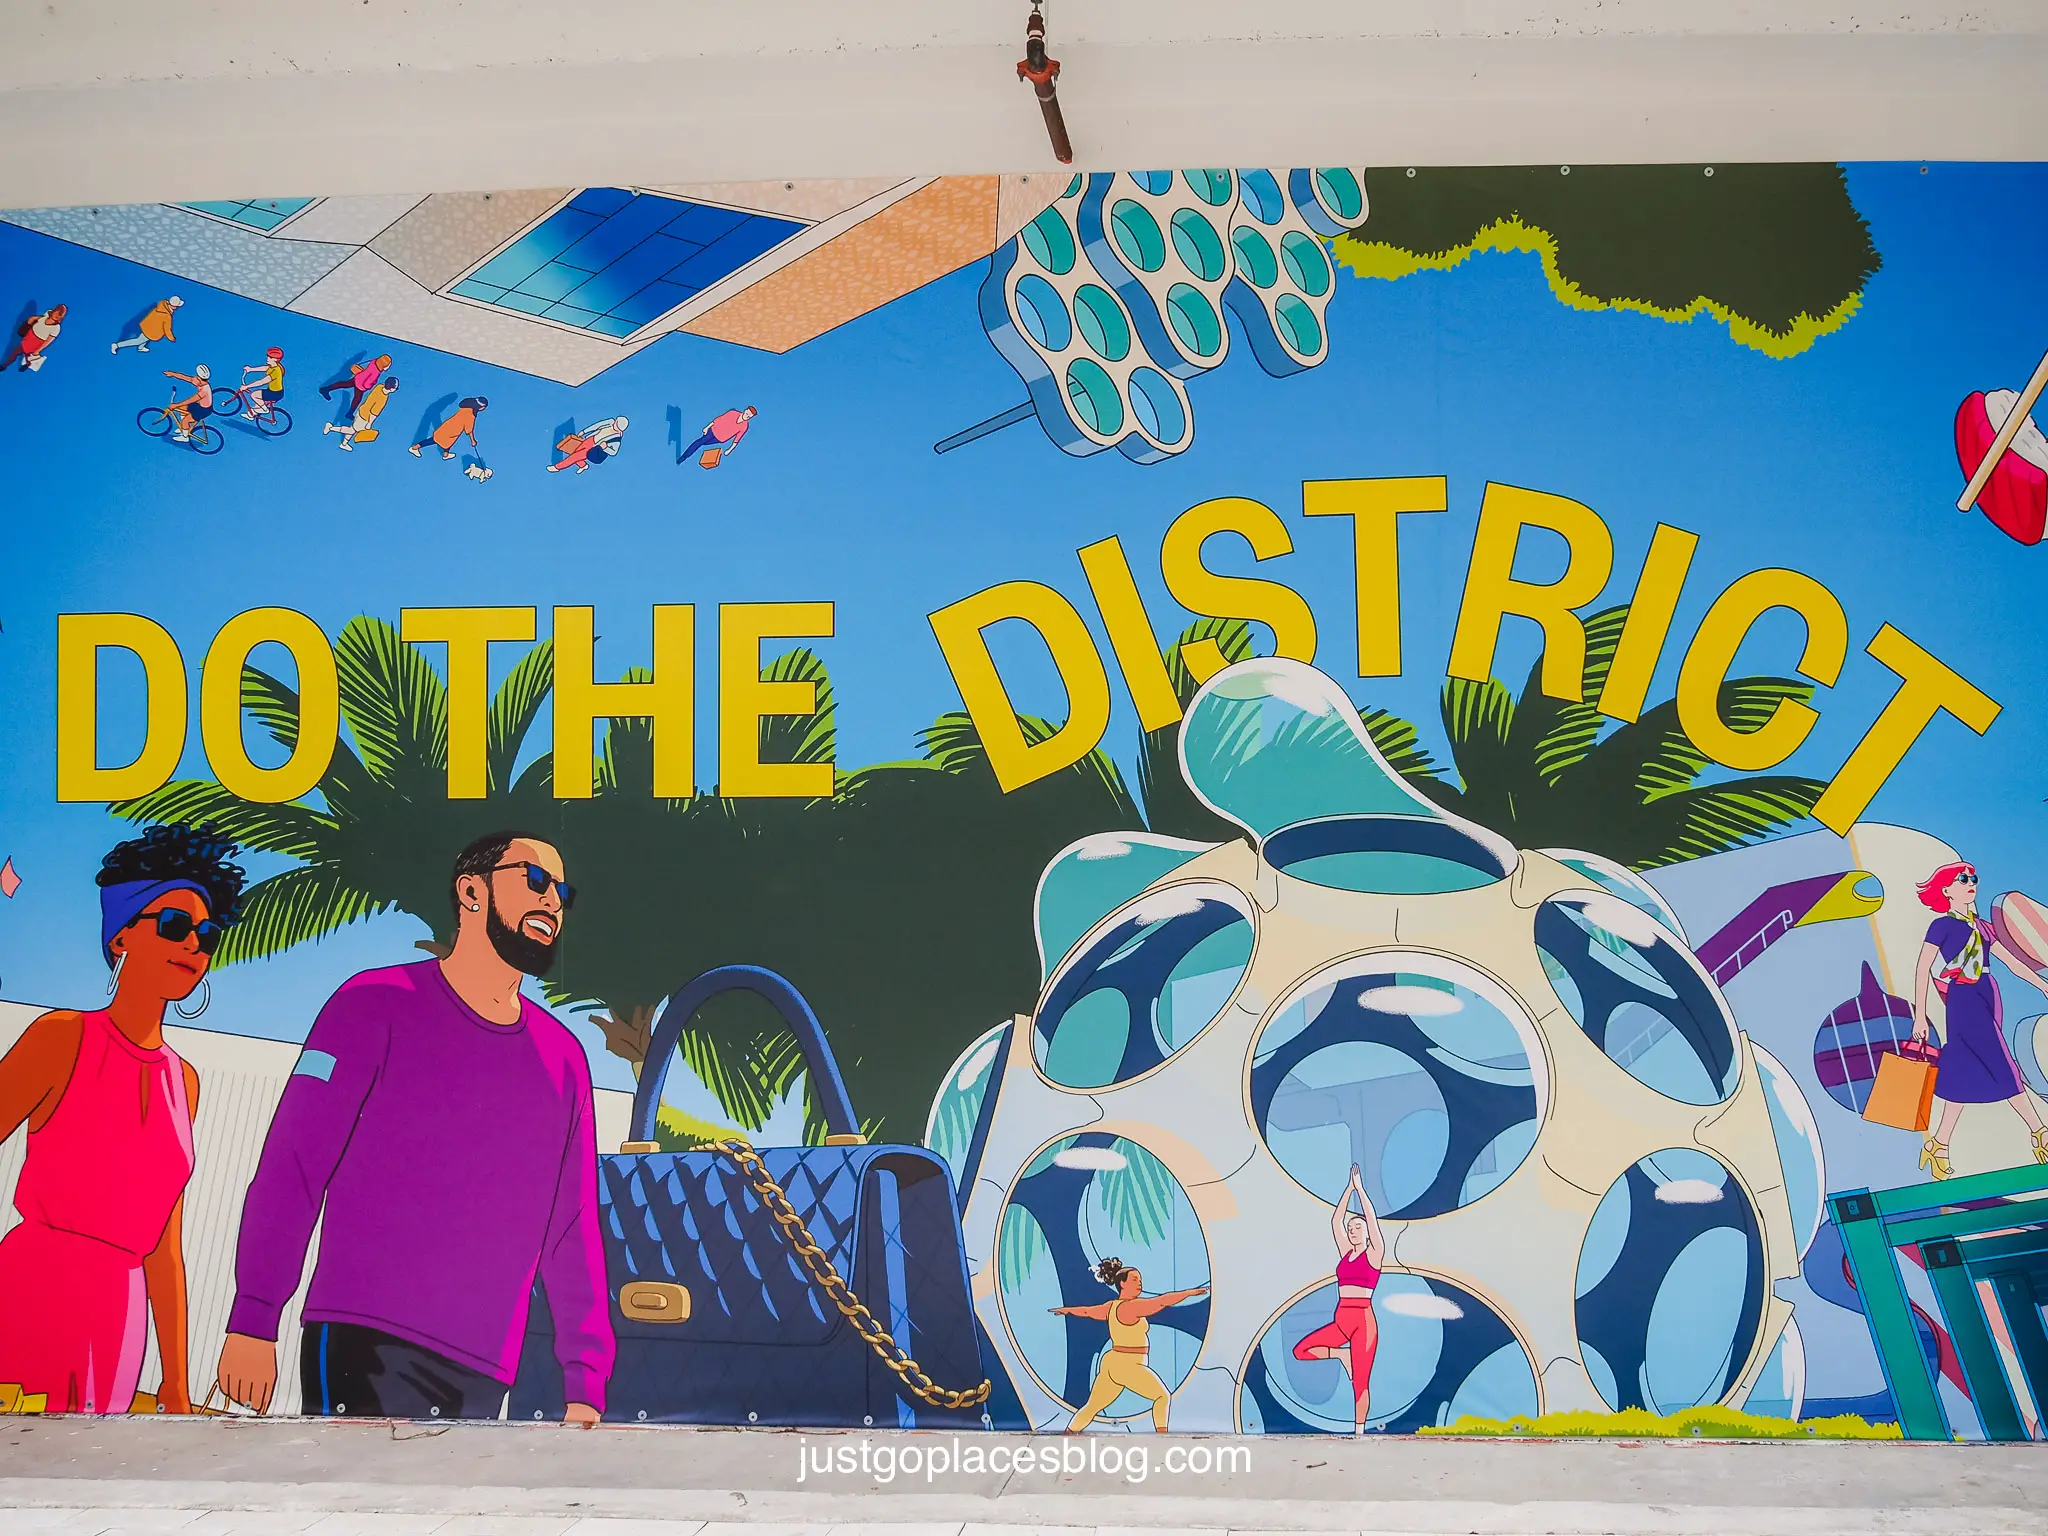 A street mural that says "do the district" in the Miami Arts District